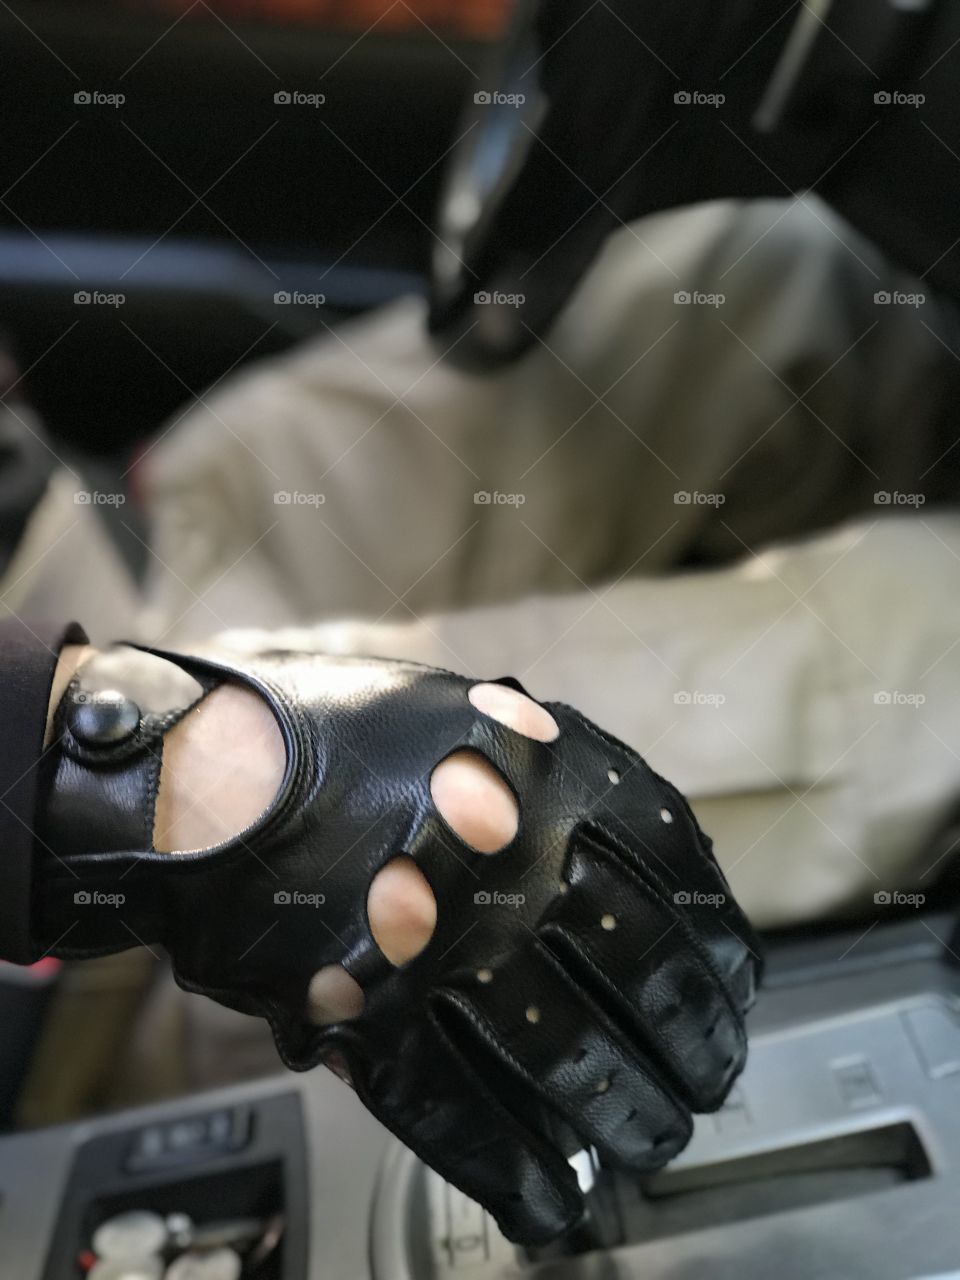 Man leaving for work with one hand on steering wheel and one hand on shifter